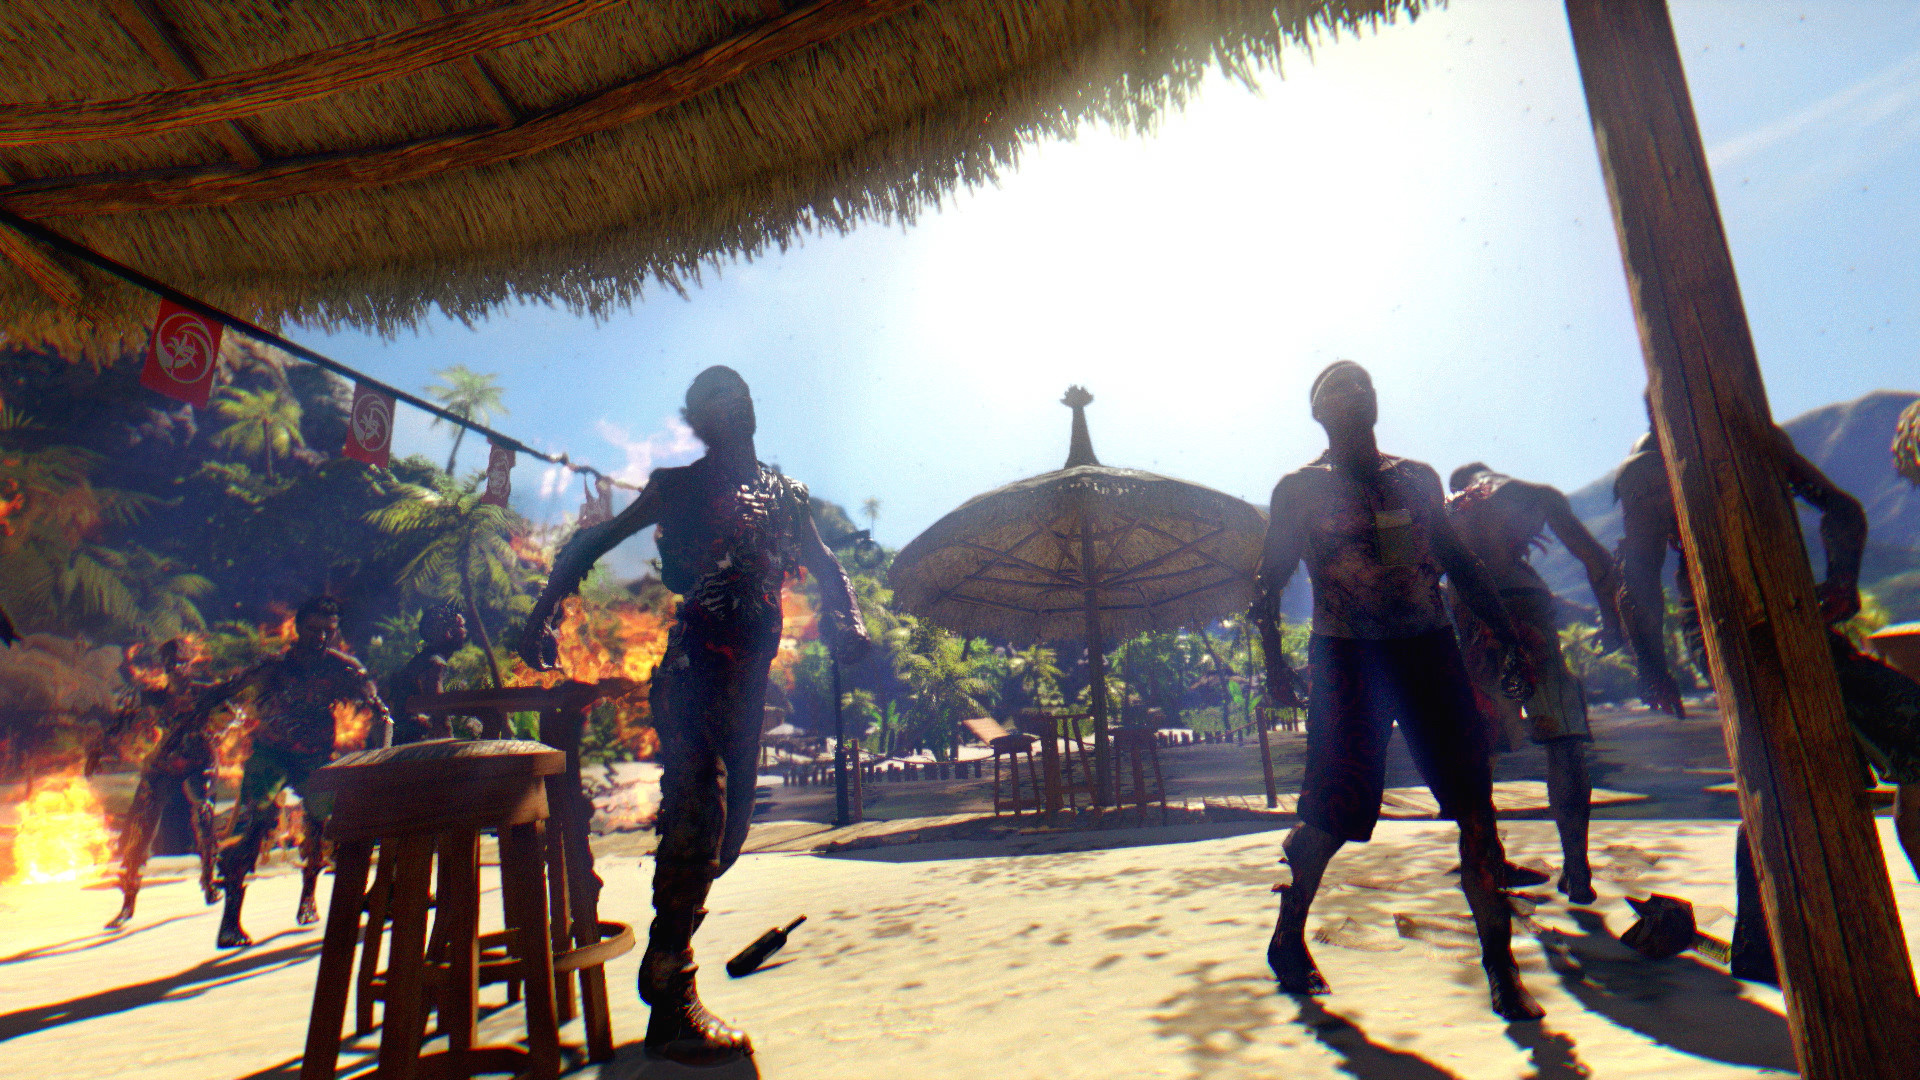 Dead Island: Riptide Definitive Edition System Requirements - Can I Run It?  - PCGameBenchmark